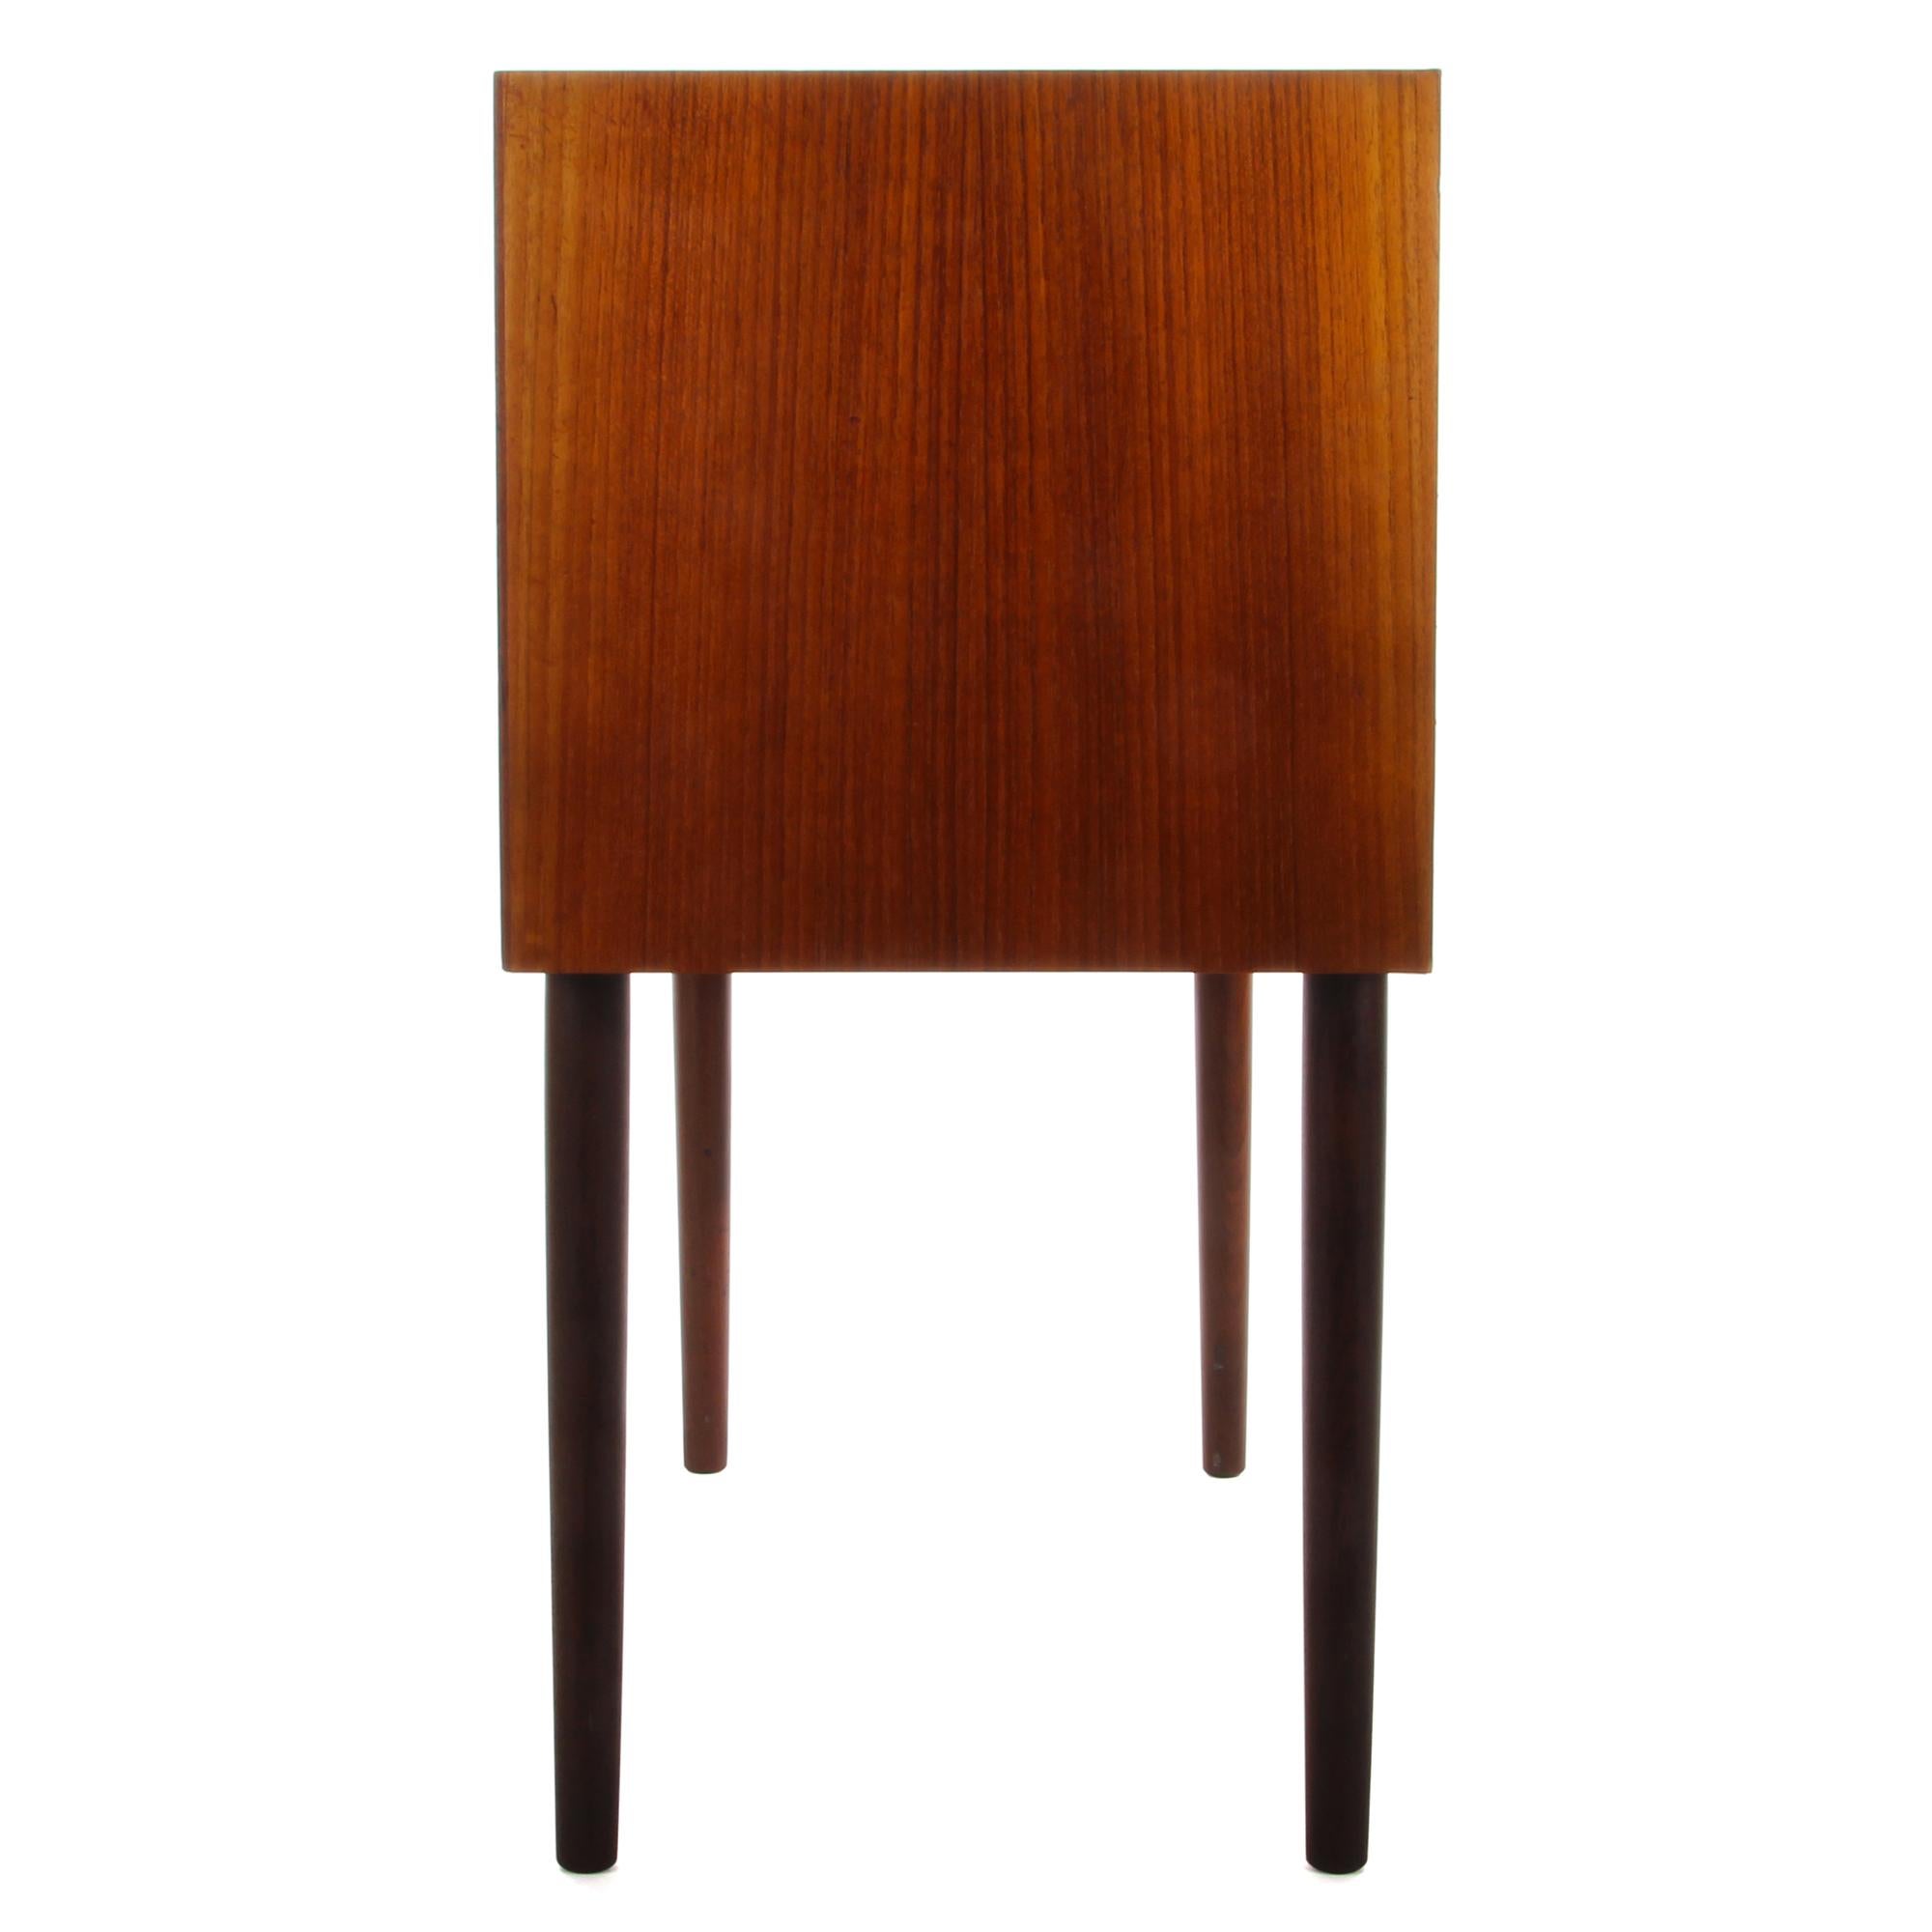 Teak Chest of Drawers from the 1960s, Danish Midcentury Dresser with Drawers 2